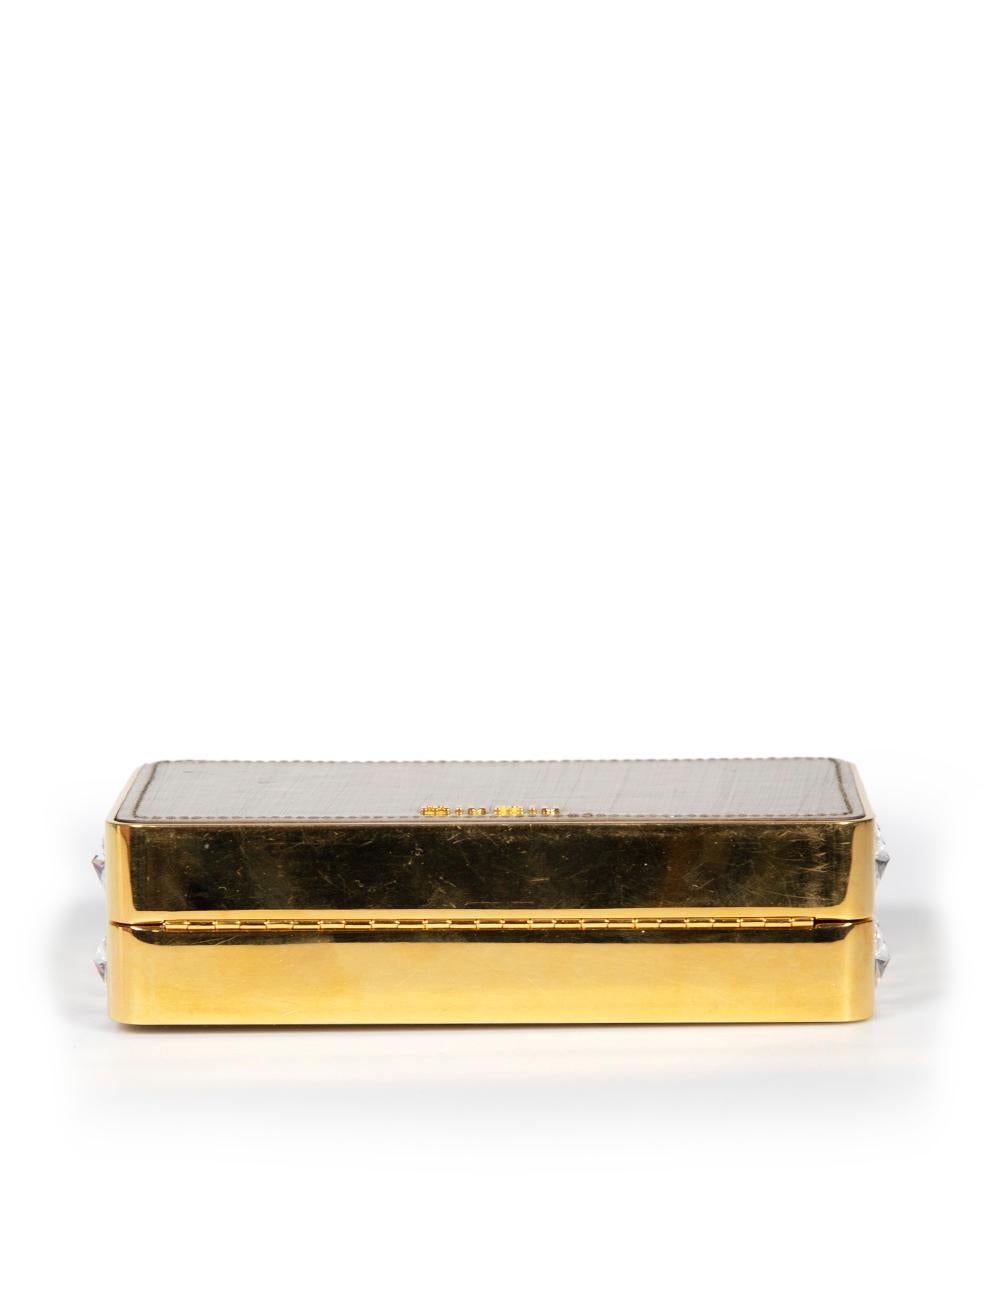 Women's Miu Miu Gold Embellished Hard Clutch with Chain For Sale